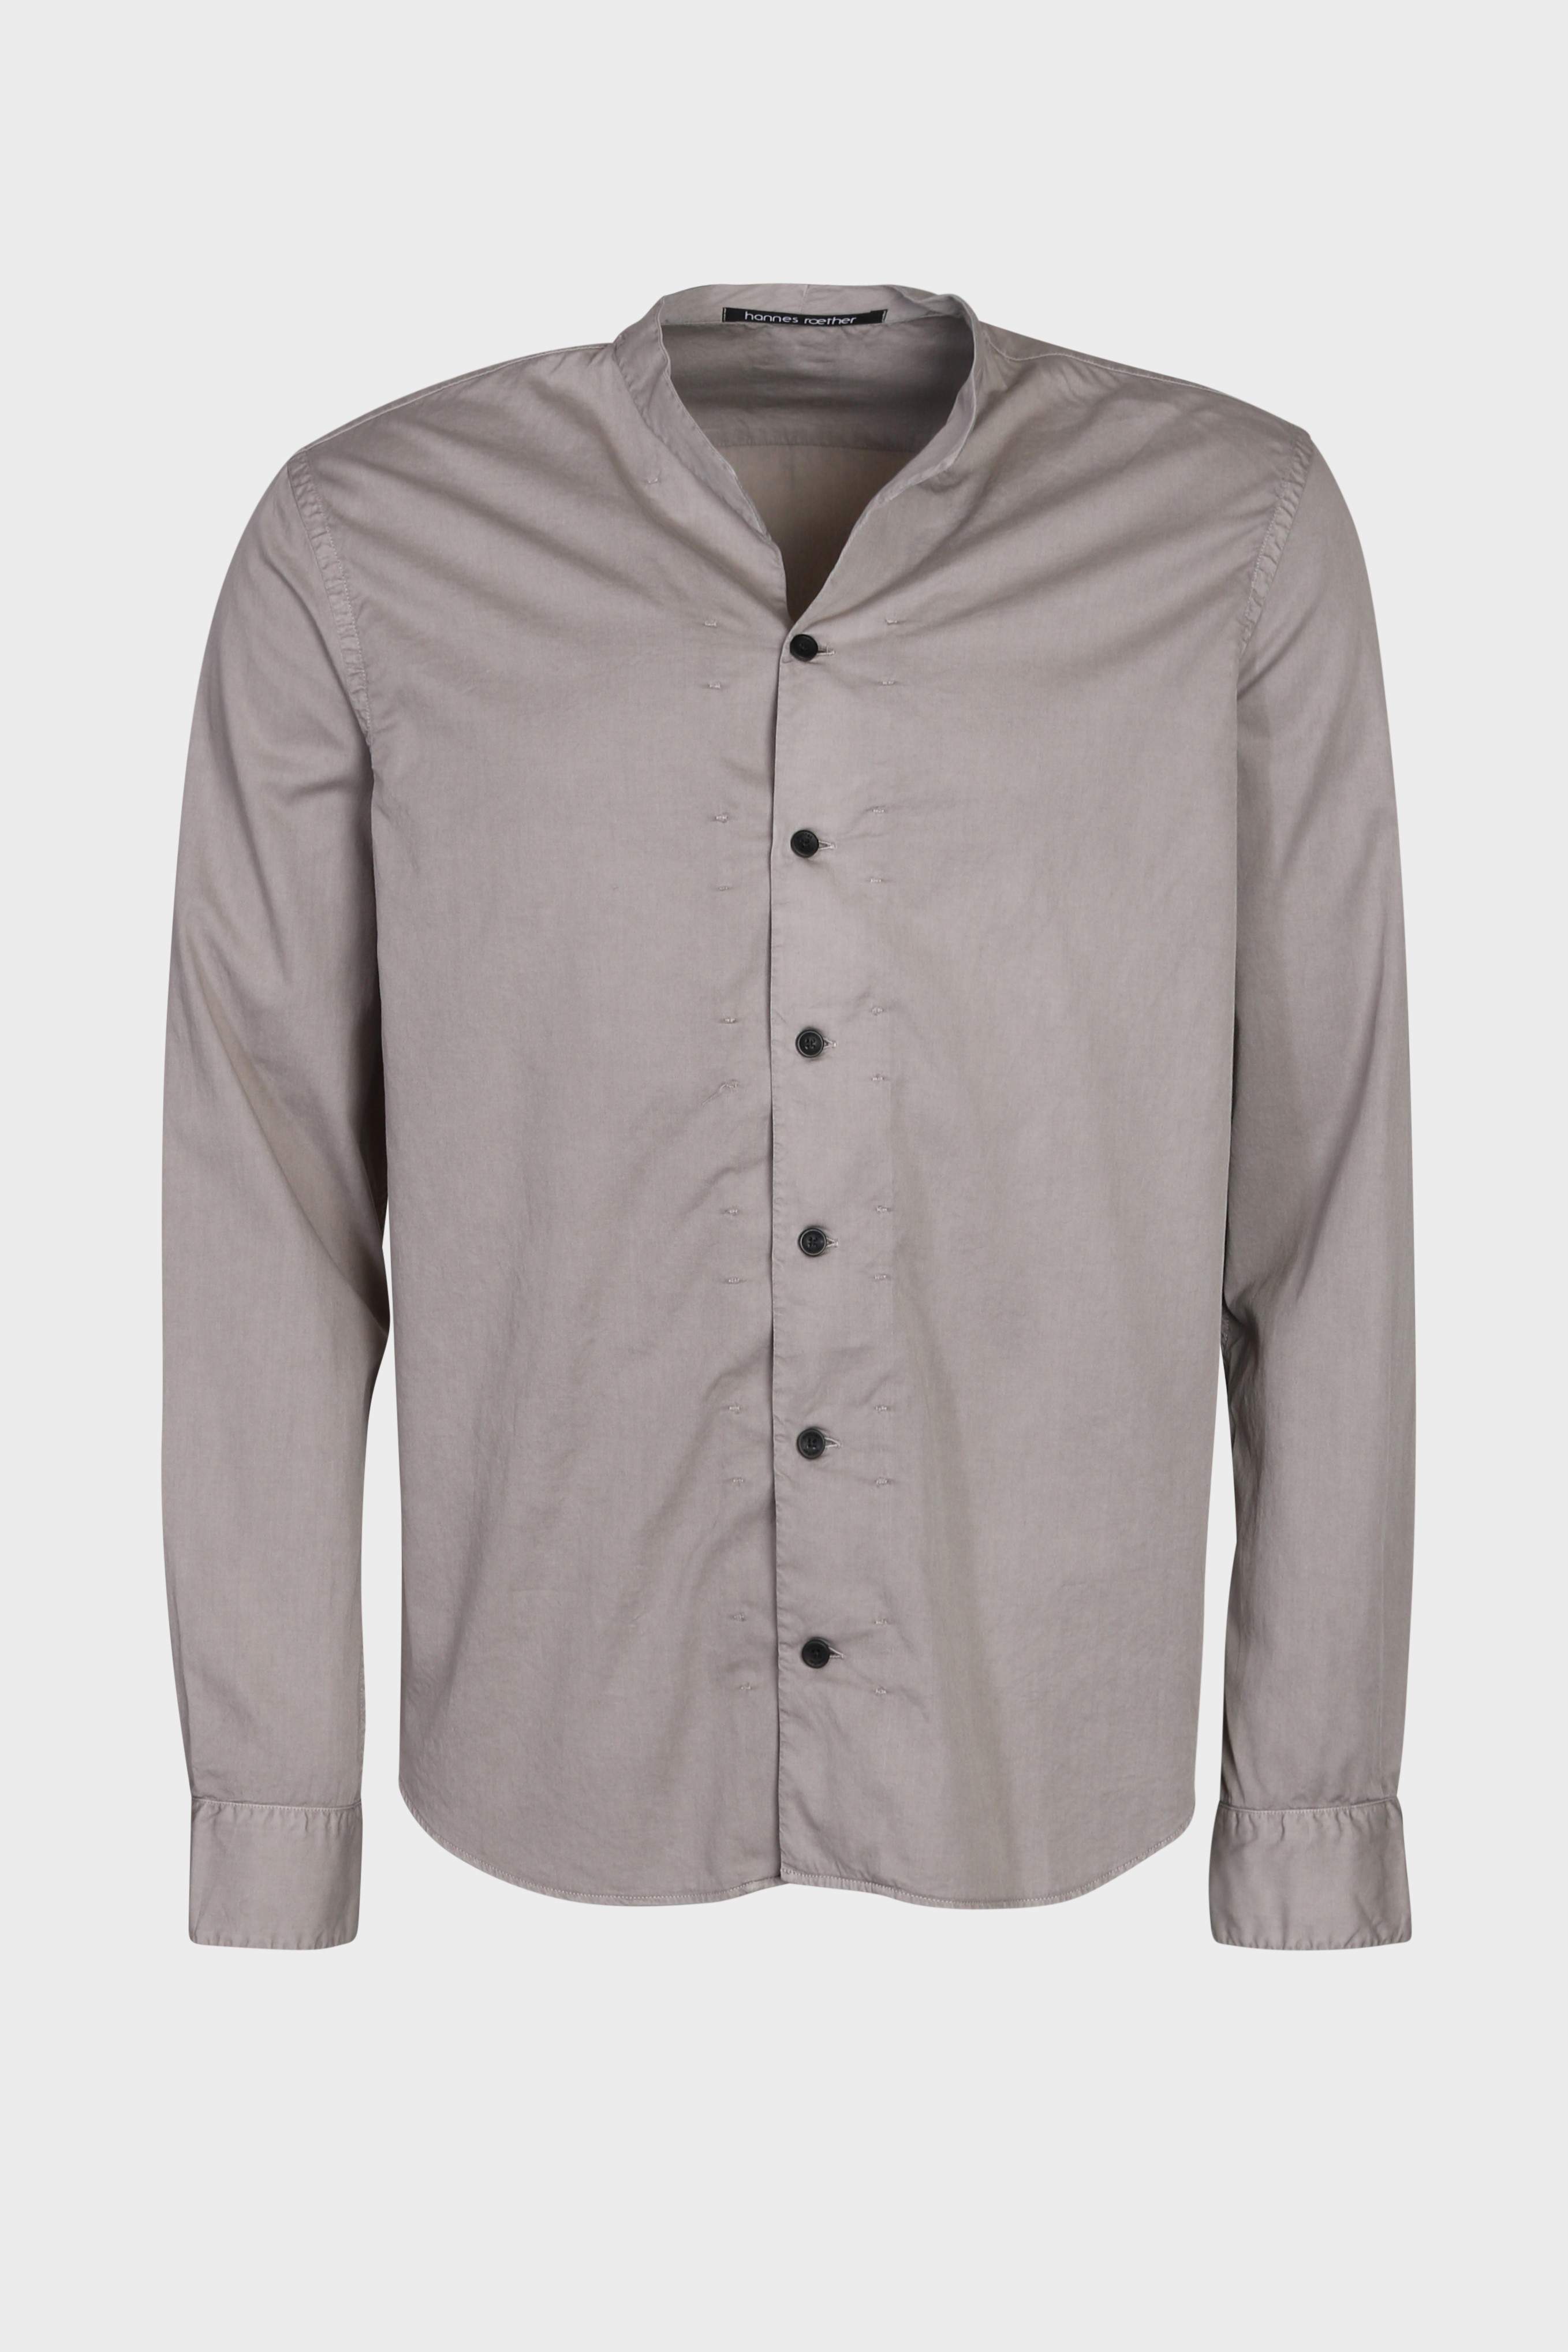 HANNES ROETHER Cotton Shirt in Taupe